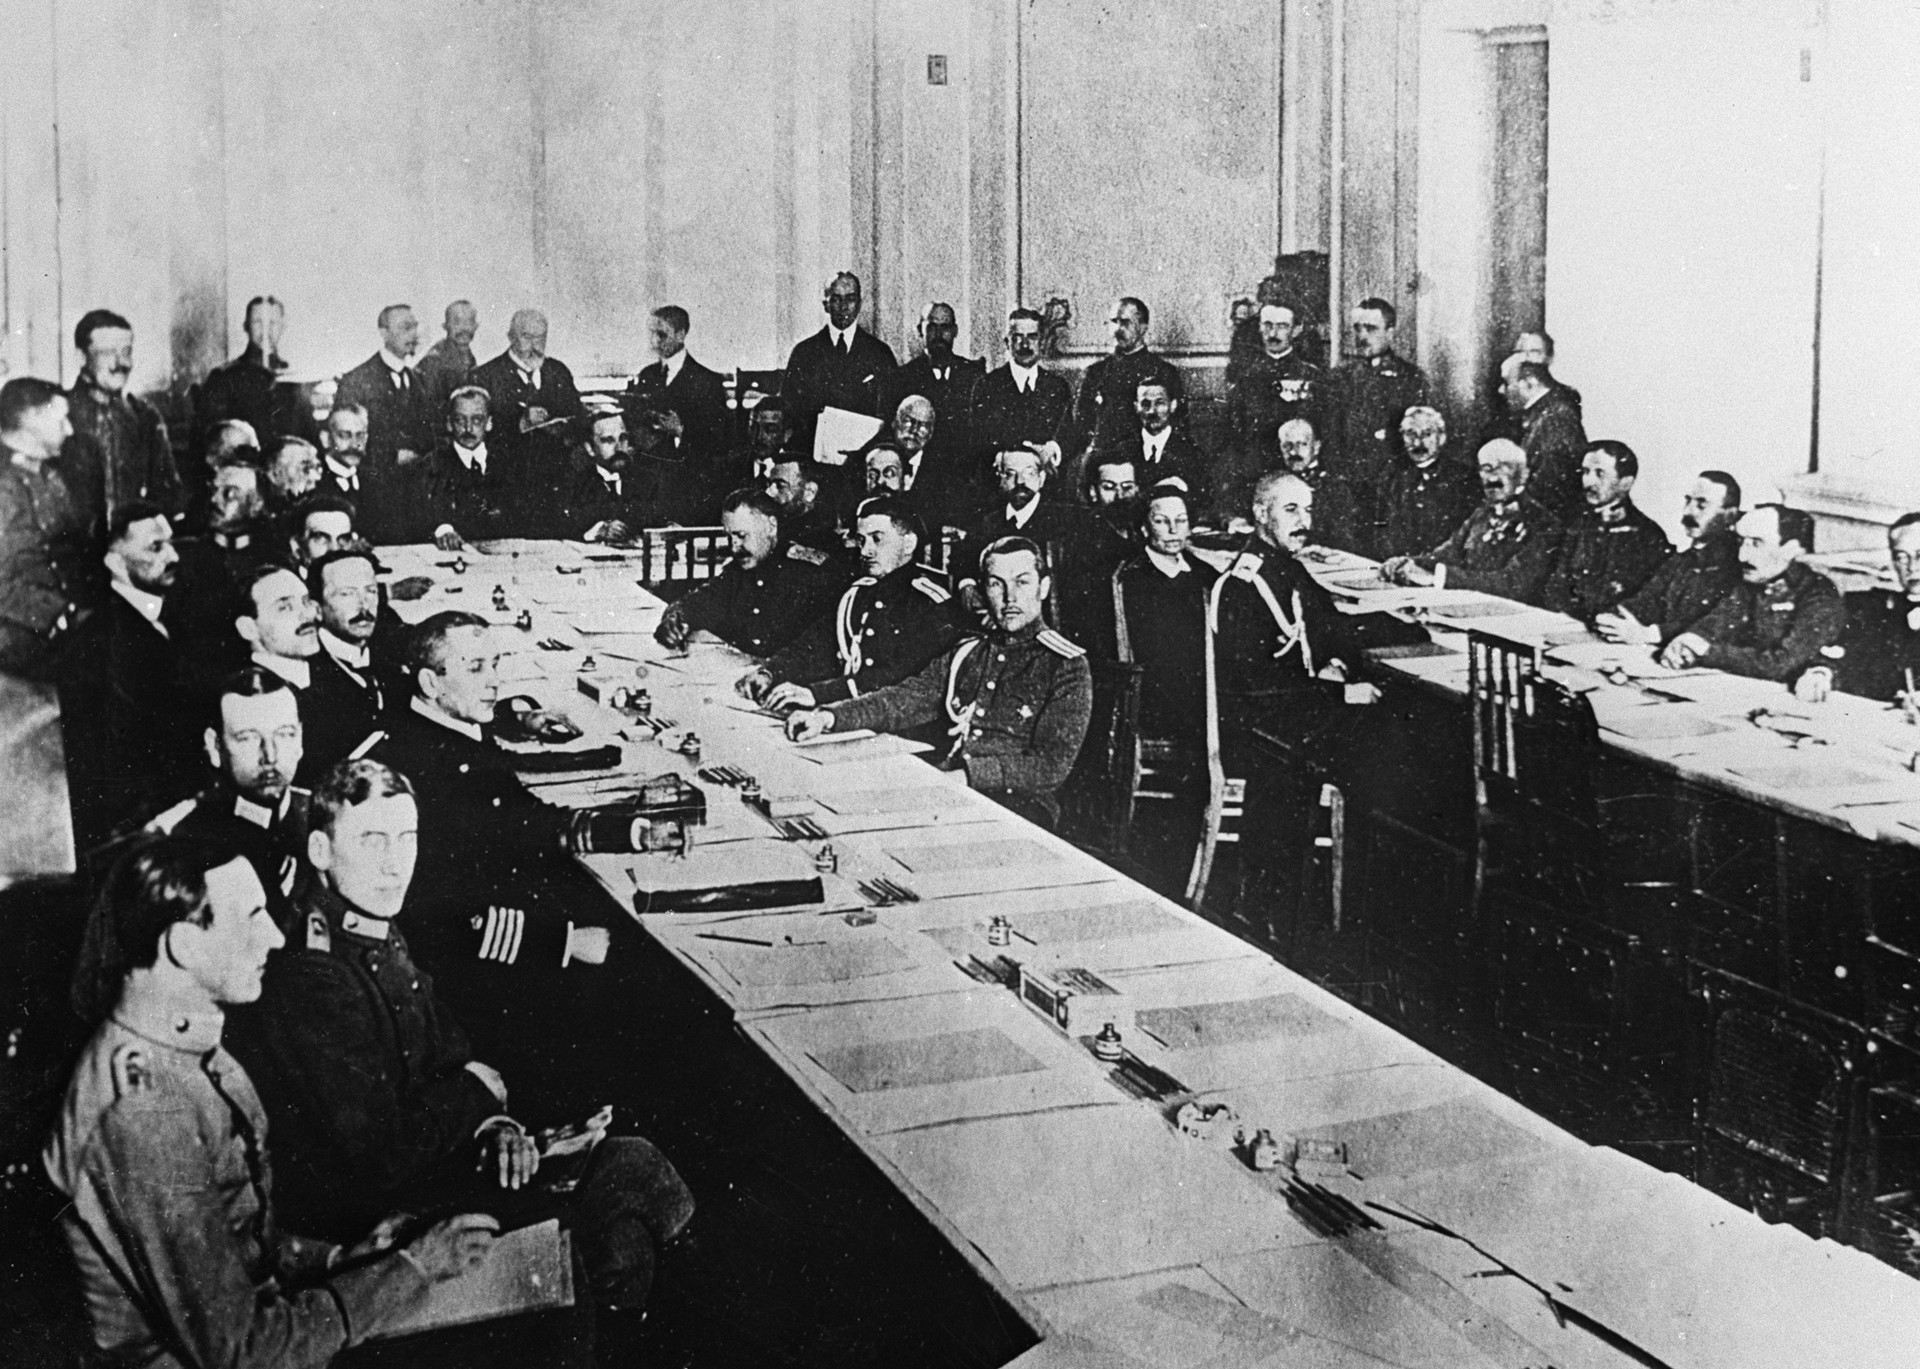 A meeting of the peace conference where the Treaty of Brest-Litovsk was concluded on March 3, 1918.